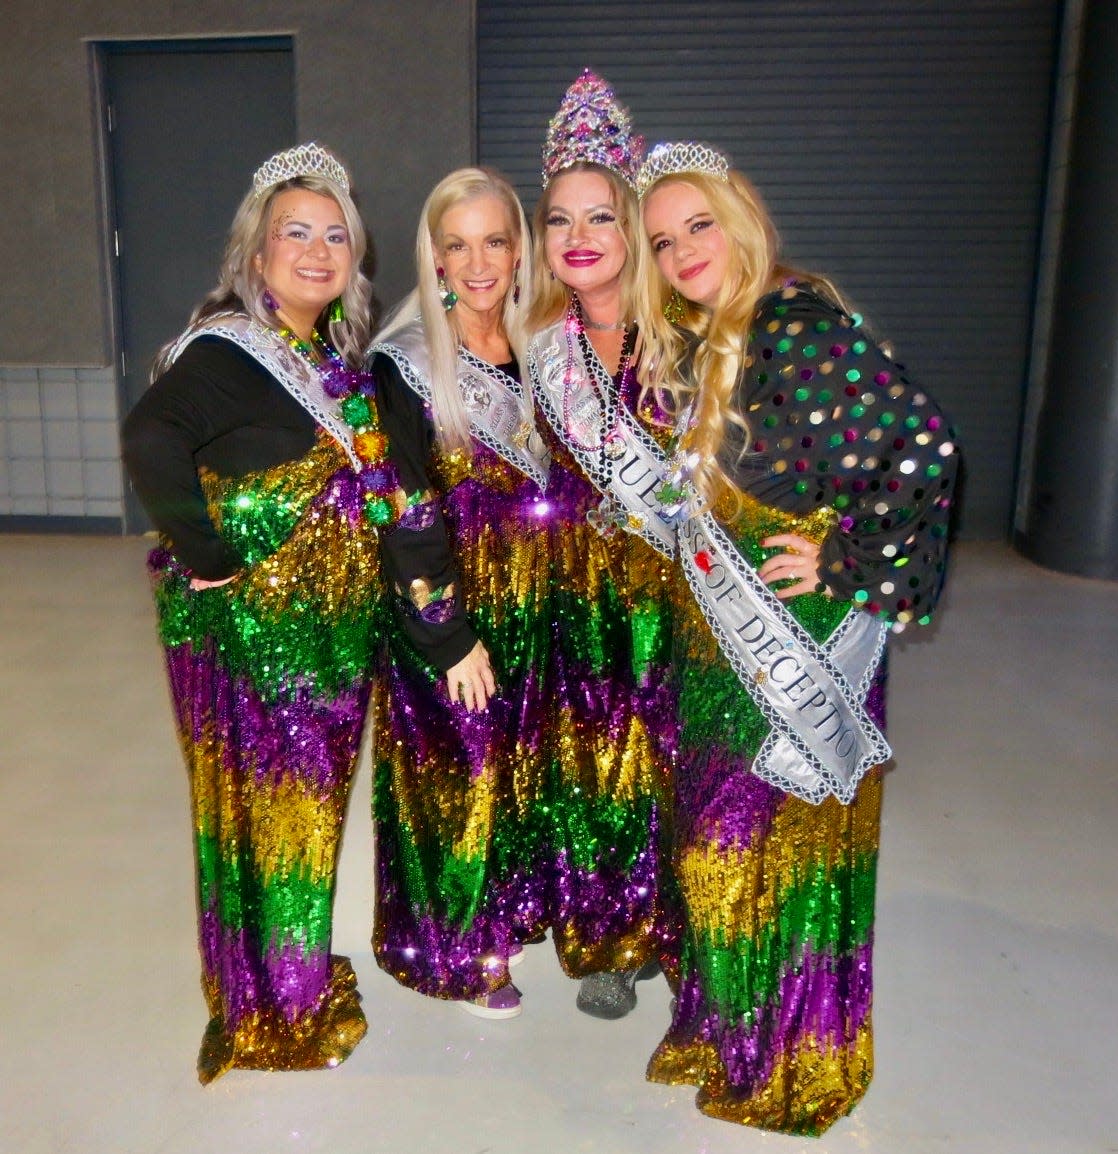 Krewe of Atlas XVI Duchess Ashley Bodie, Captain Theresa Miller, Queen Tommi Johnson and Duchess Brittany Johnson show of their matching Mardi Gras outfits at the Twelfth Night Party.